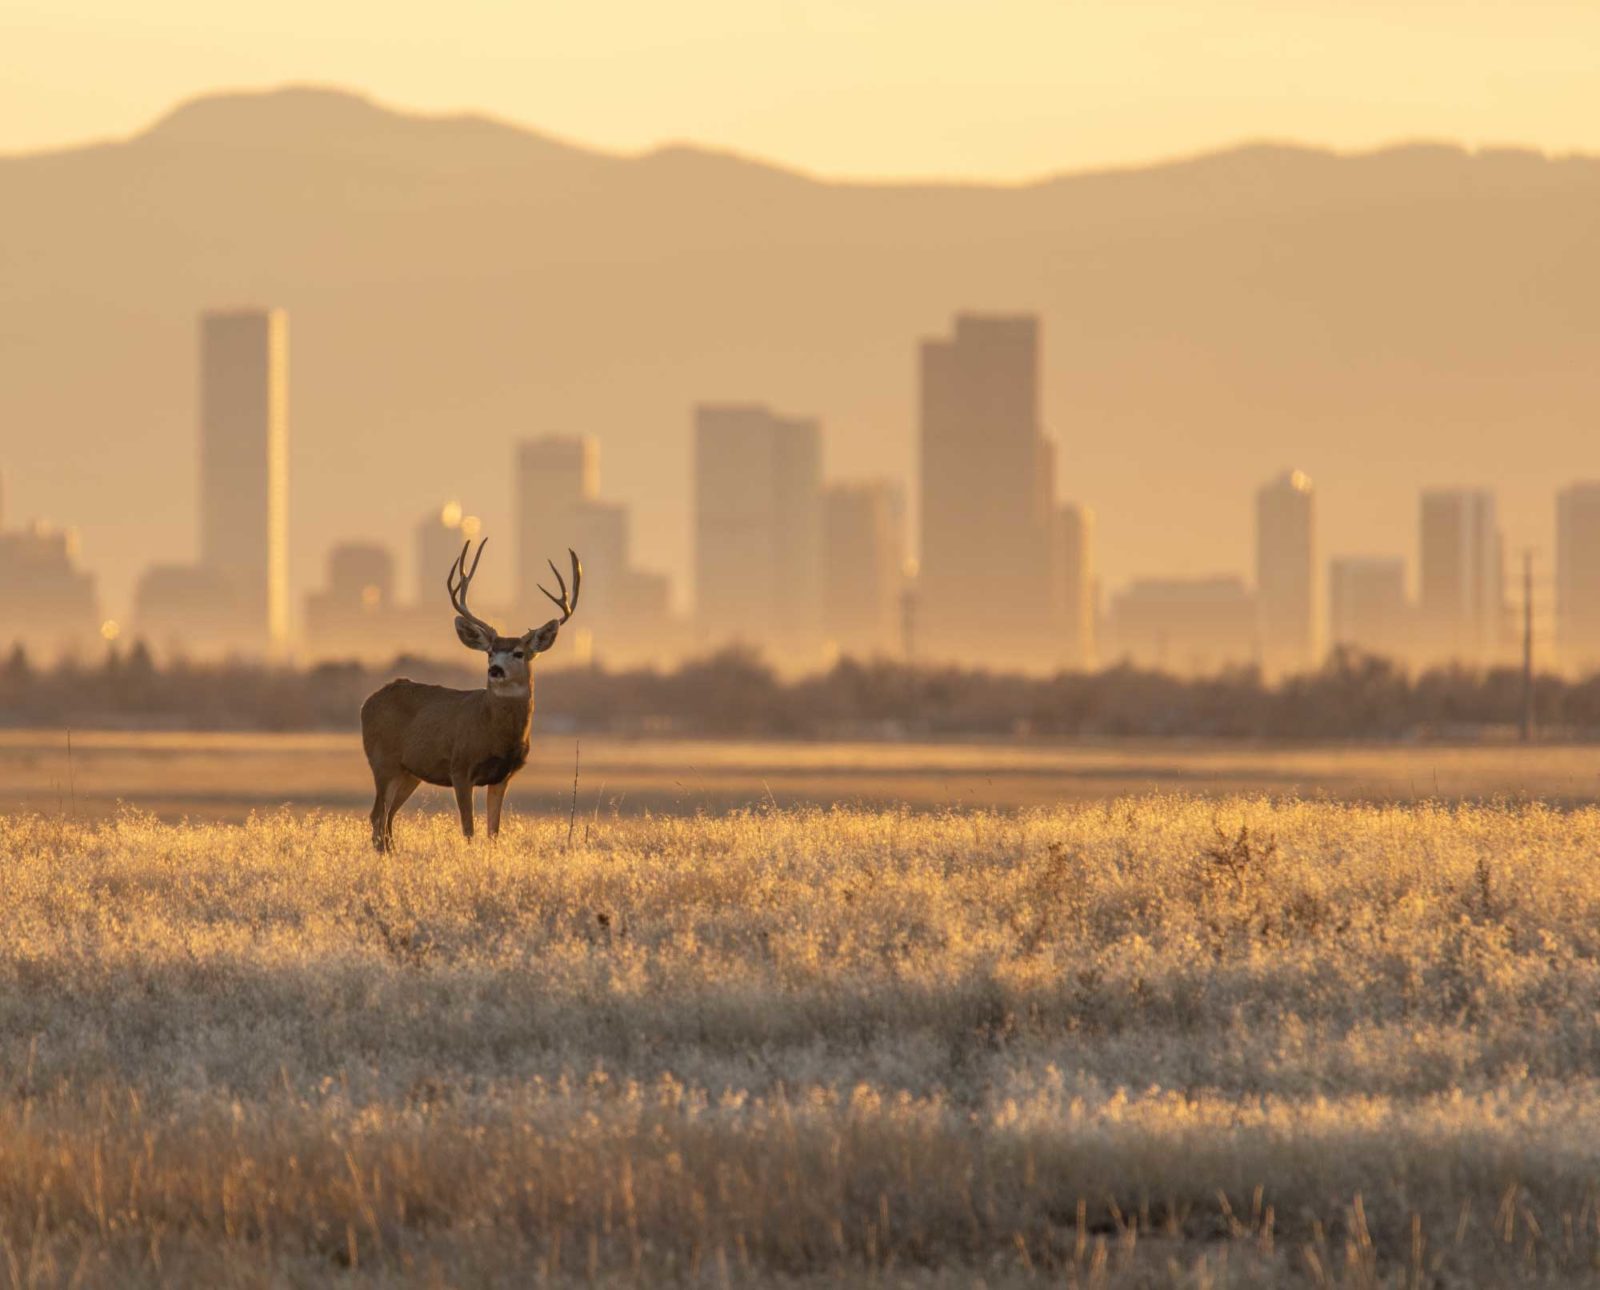 A mule deer stands with the large city of Denver in the background